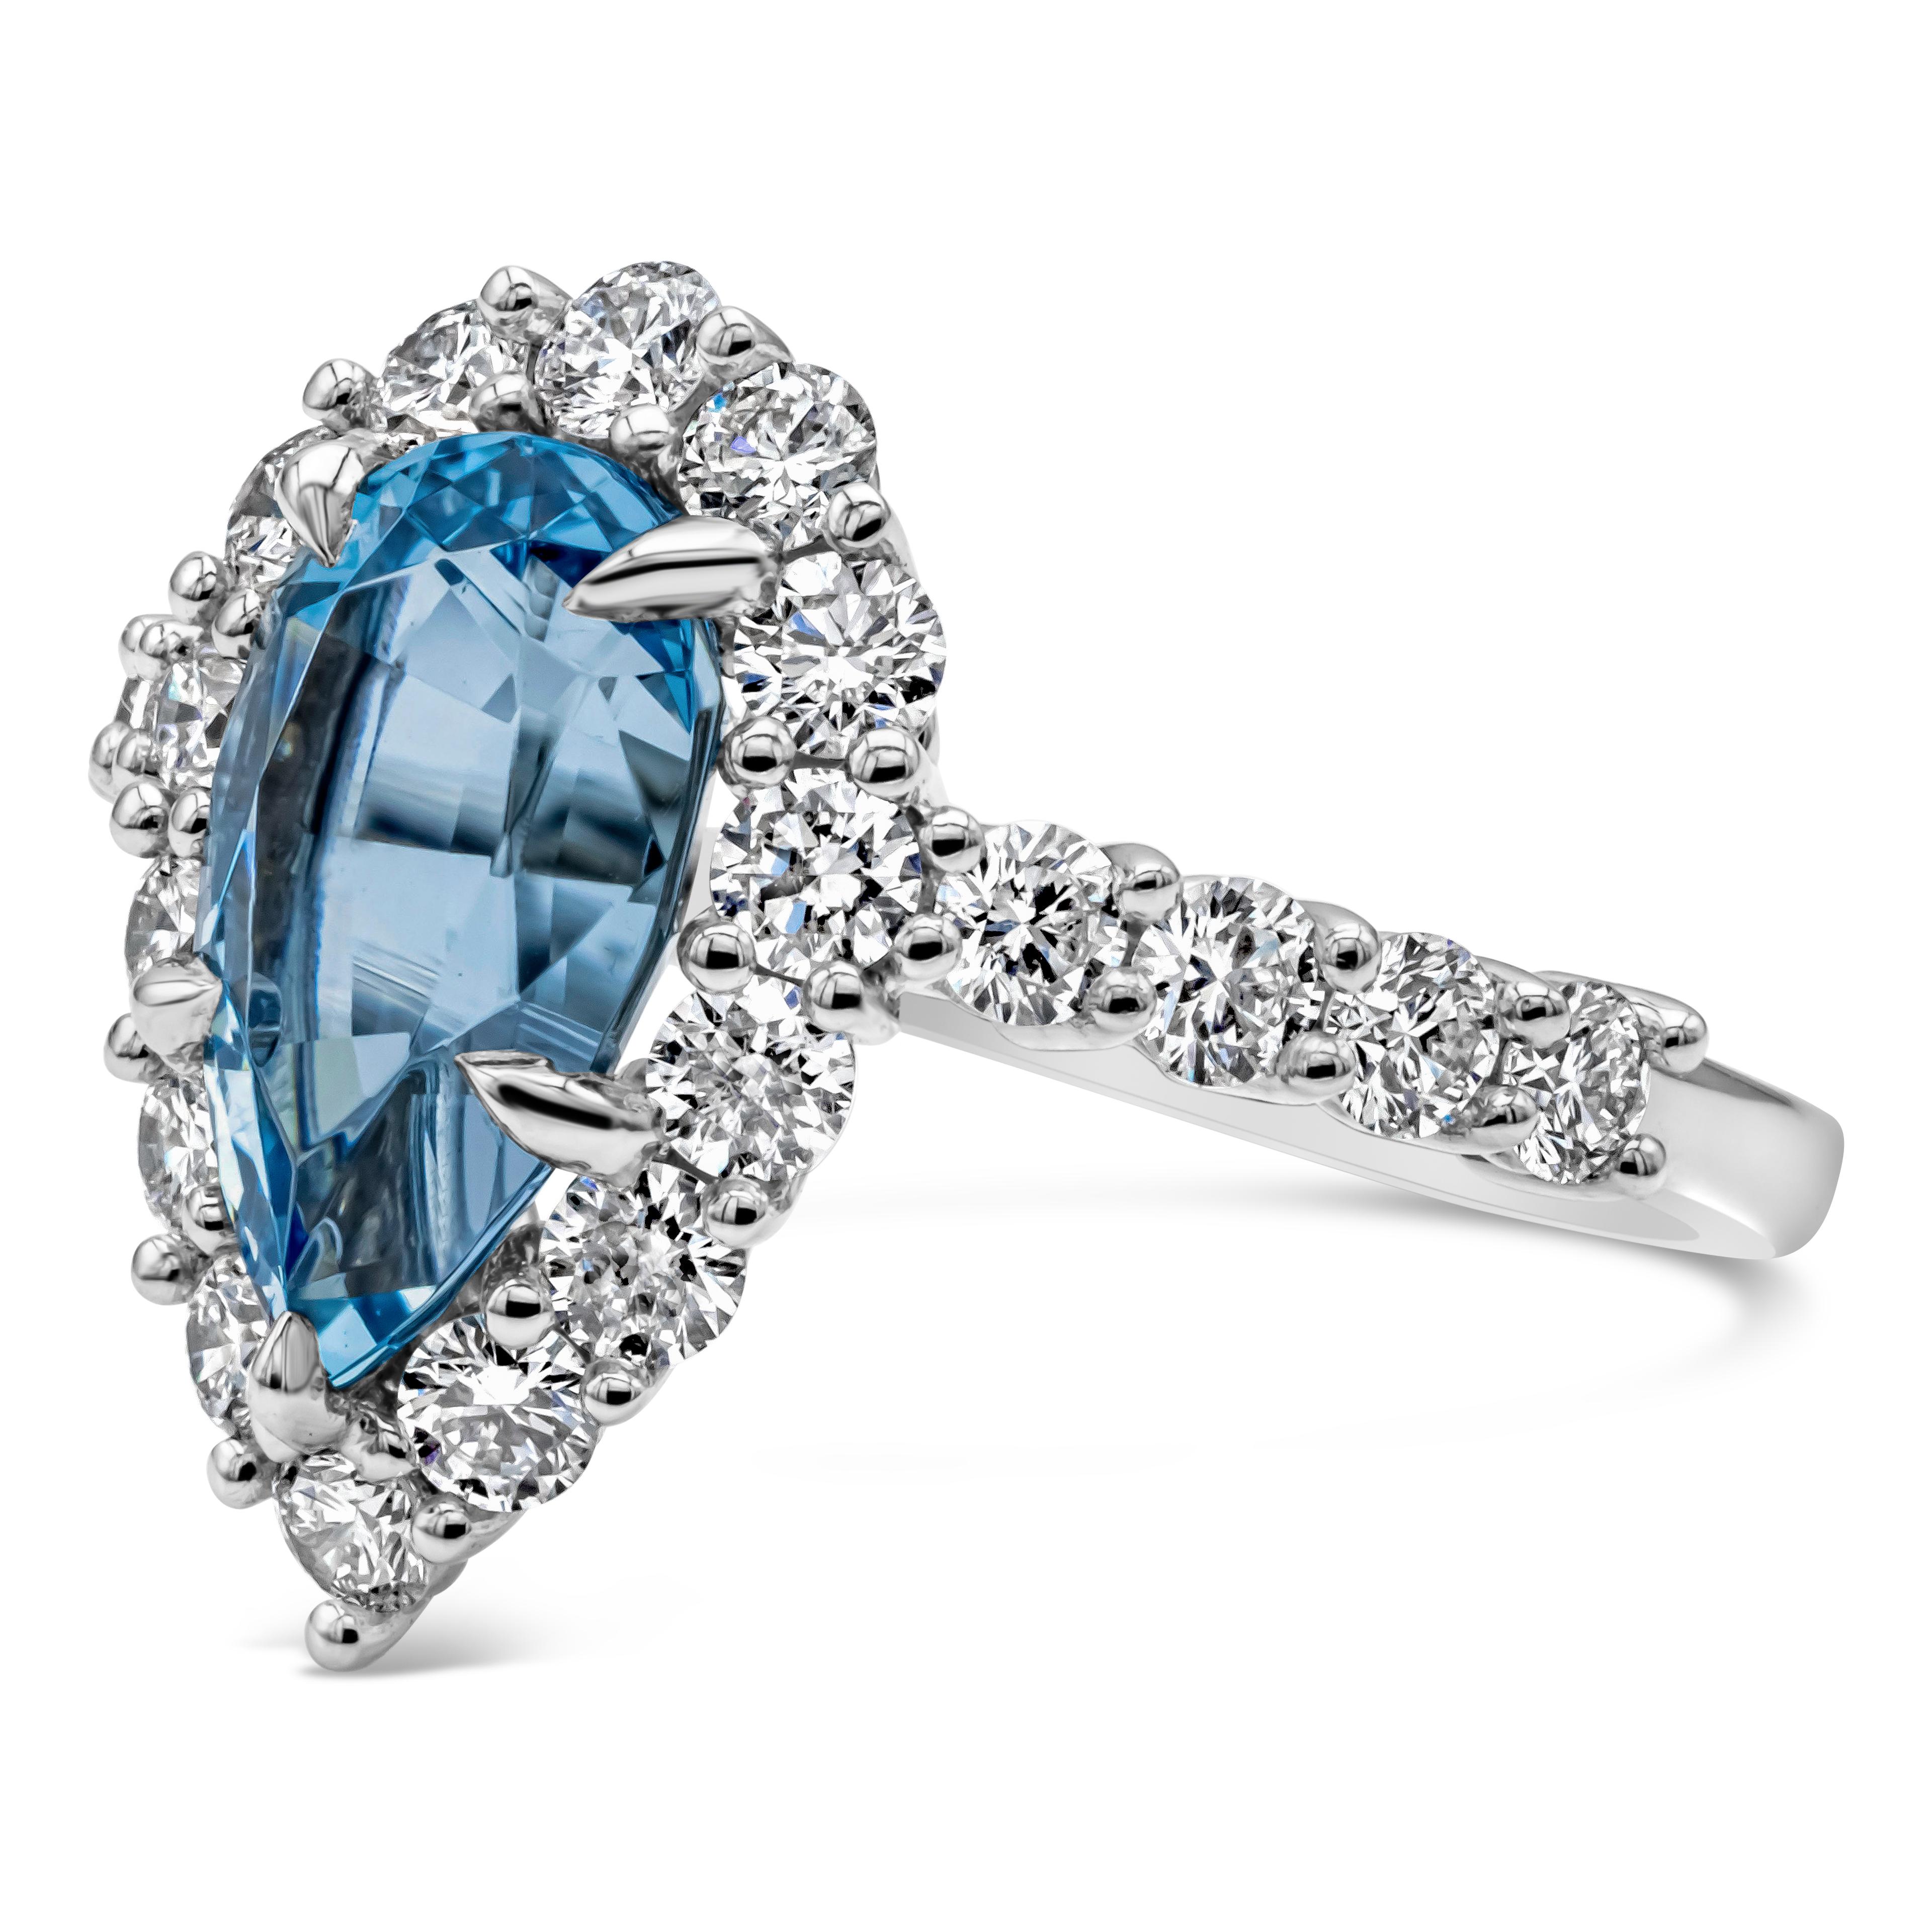 A simple and timeless halo engagement ring showcasing pear shape blue aquamarine weighing 2.45 carat total. Surrounded and accented by brilliant round diamonds in a halo design and half way down the band. Diamonds weigh 1.32 carats total, F Color VS